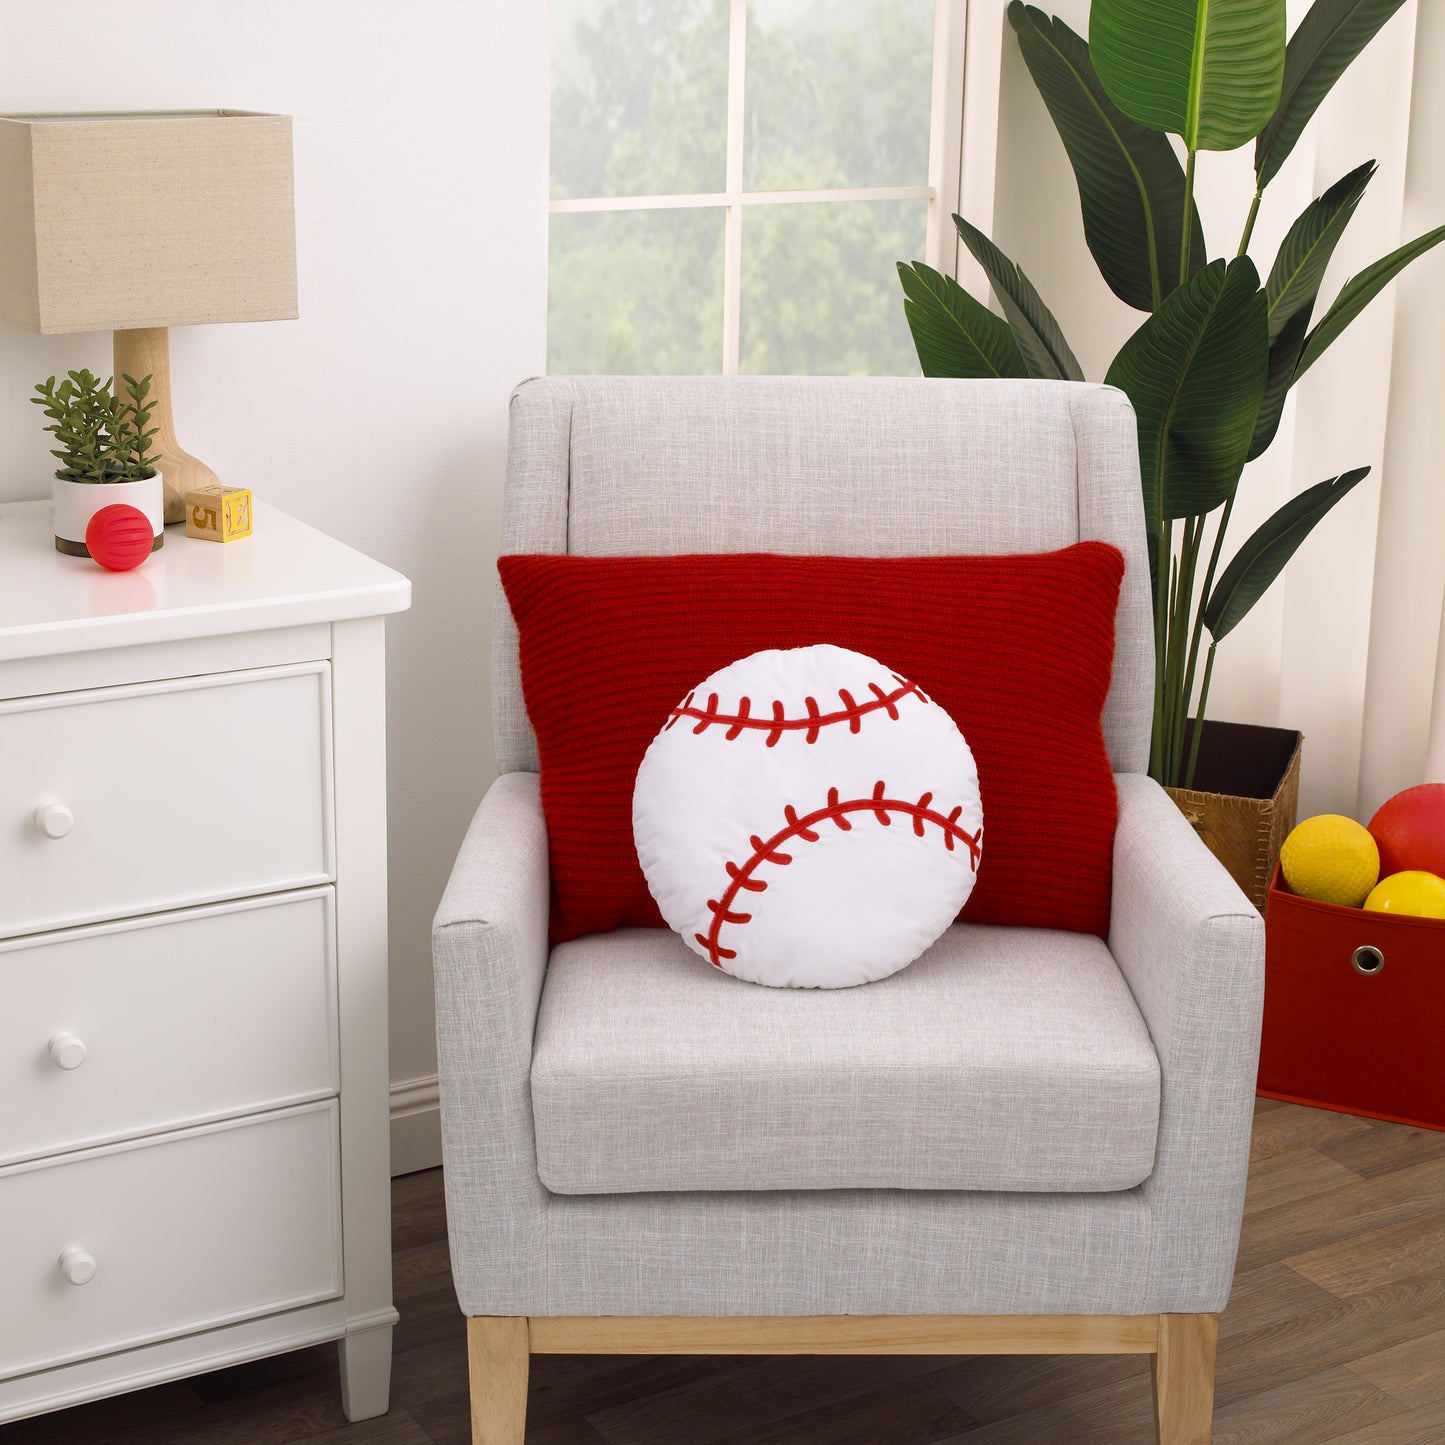 Little Love by NoJo Sports Decorative Pillow - White and Red Baseball with Embroidery